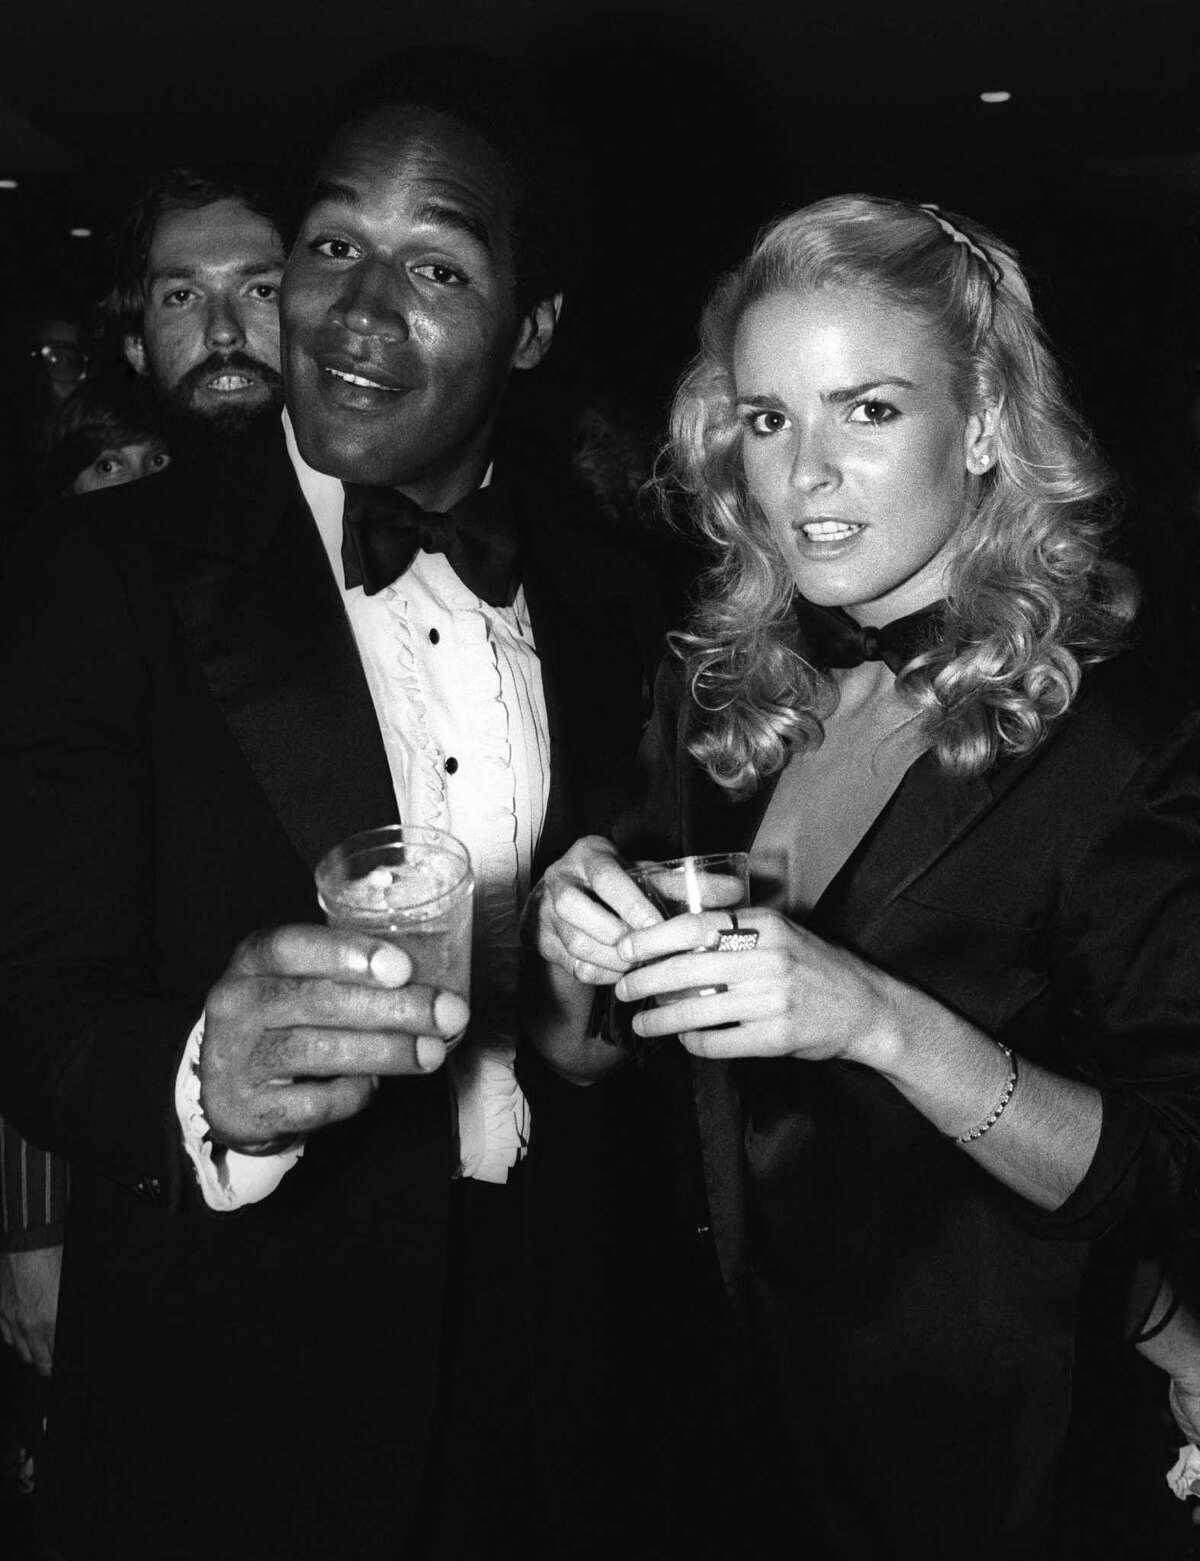 By age 18, the homecoming princess was working at a Beverly Hills club called the Daisy when she first met O.J. Simpson.